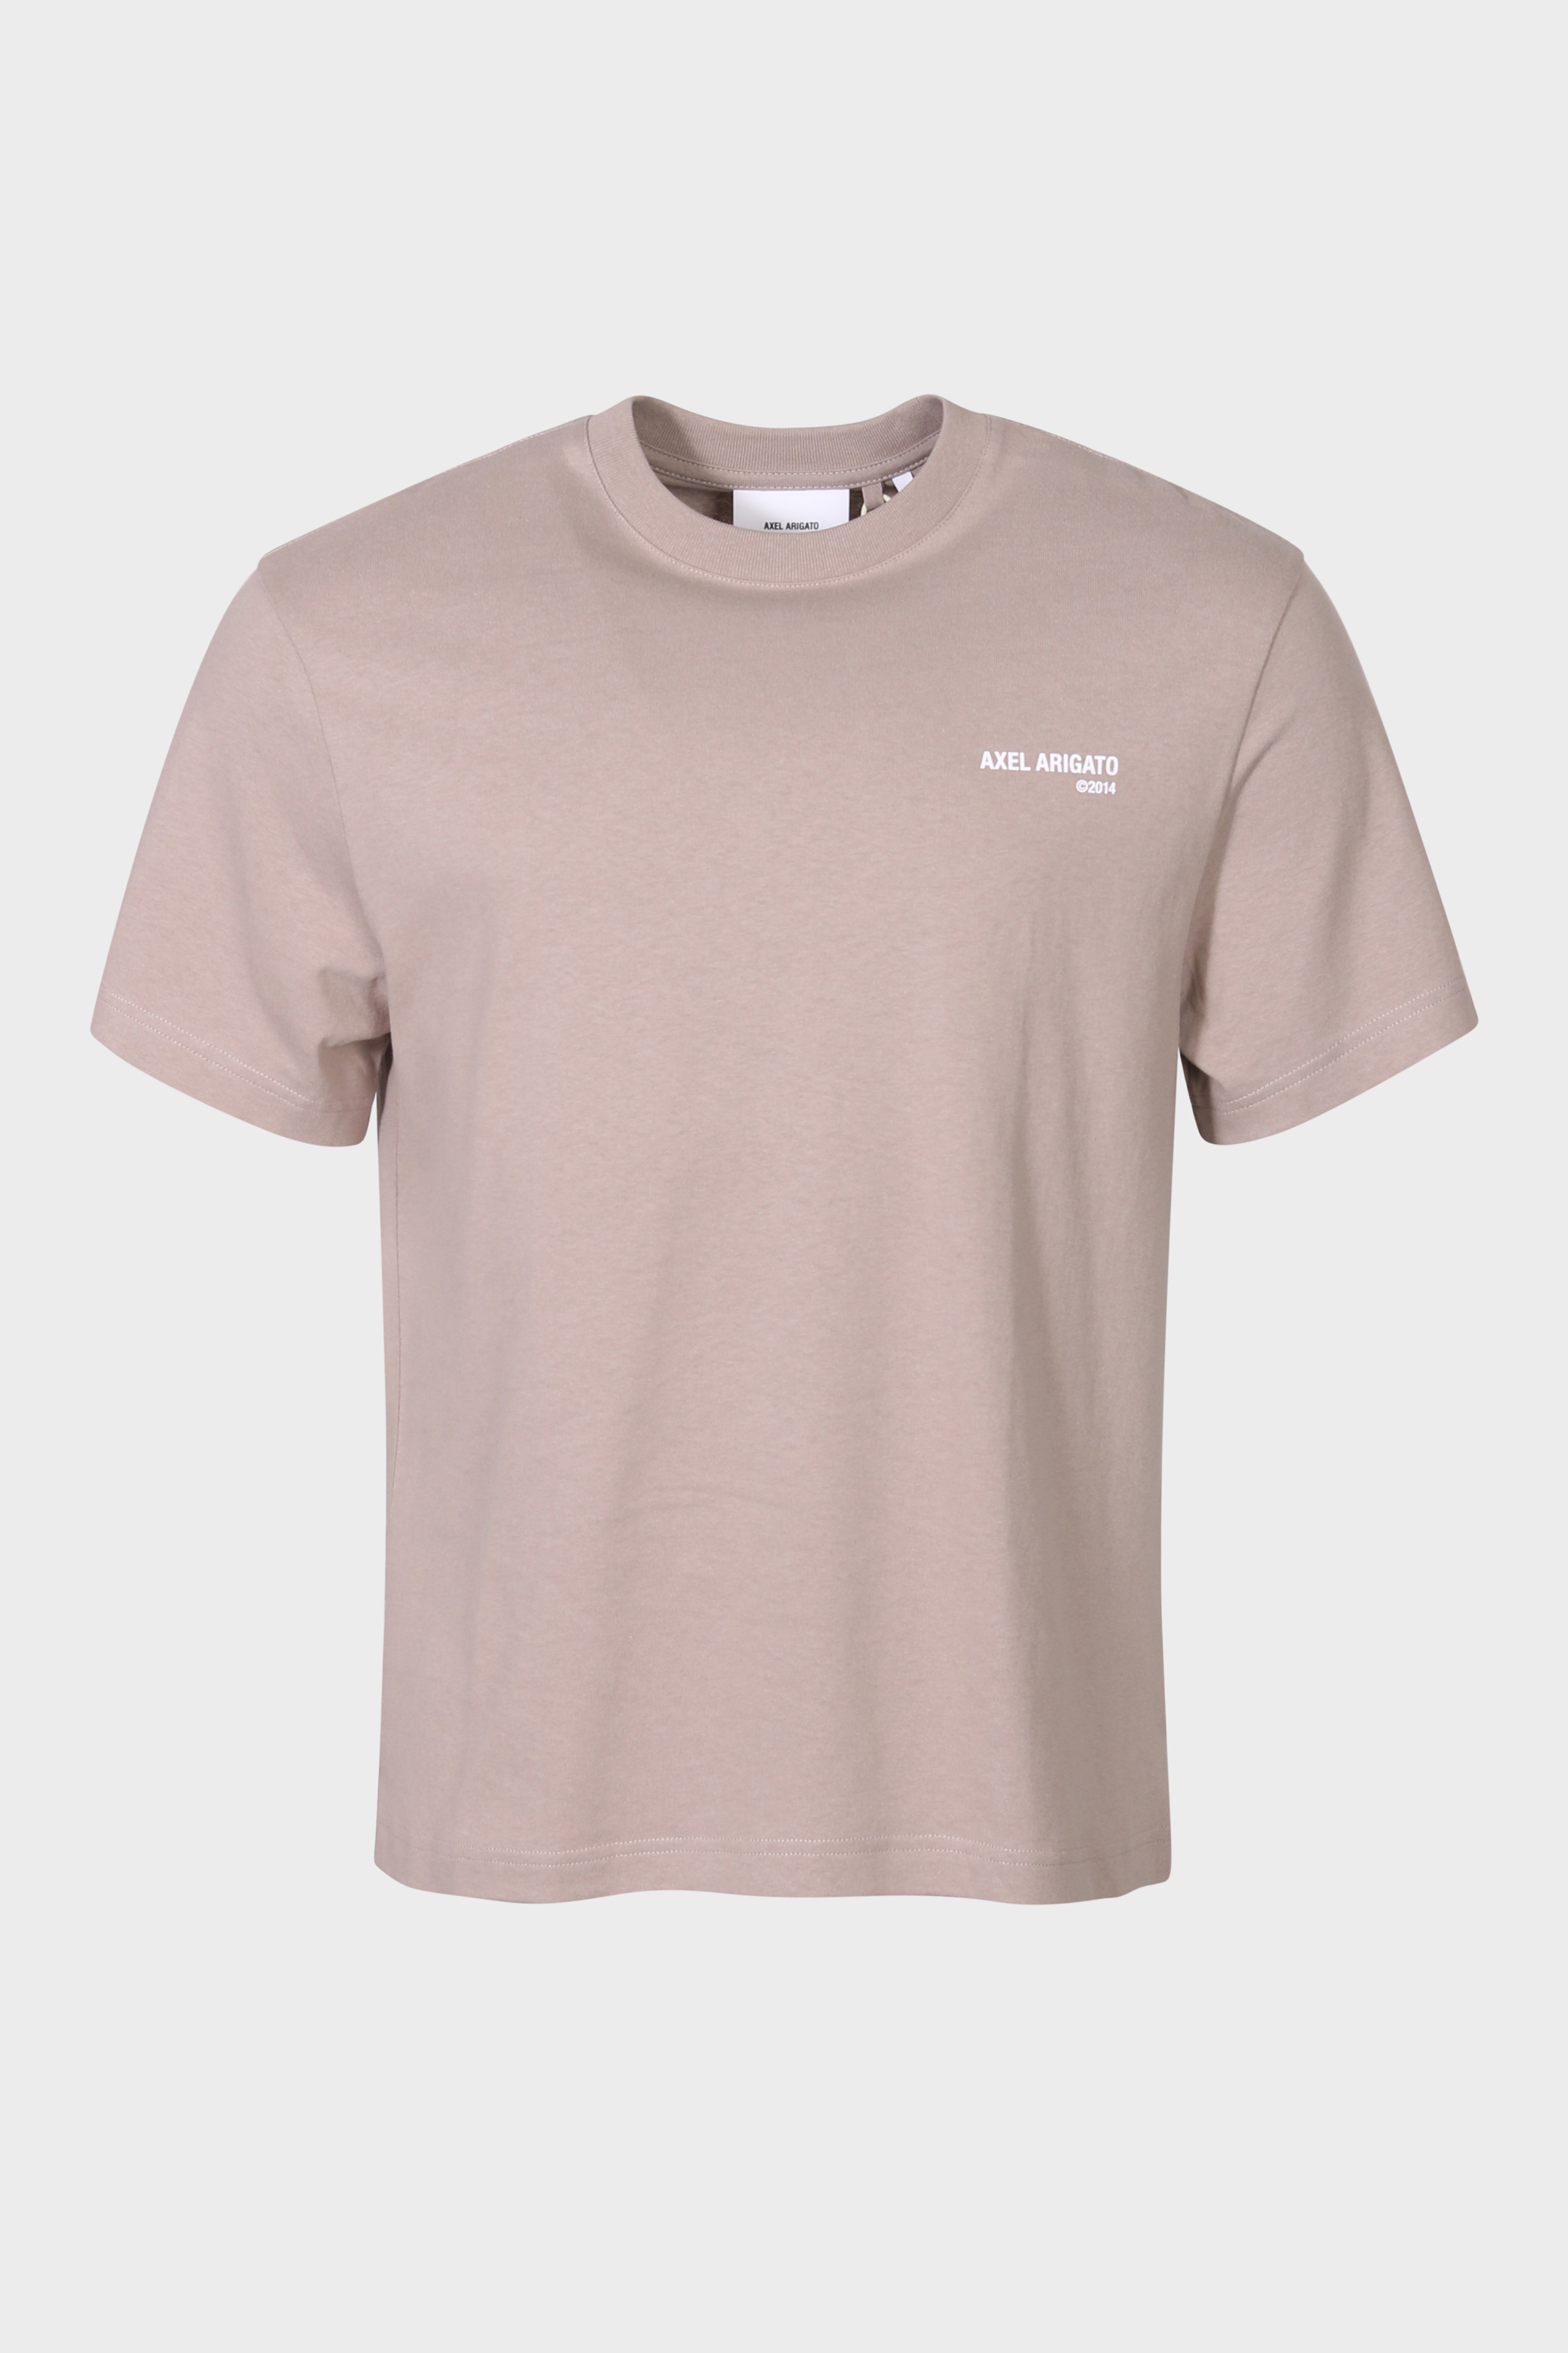 AXEL ARIGATO Legacy T-Shirt in Taupe